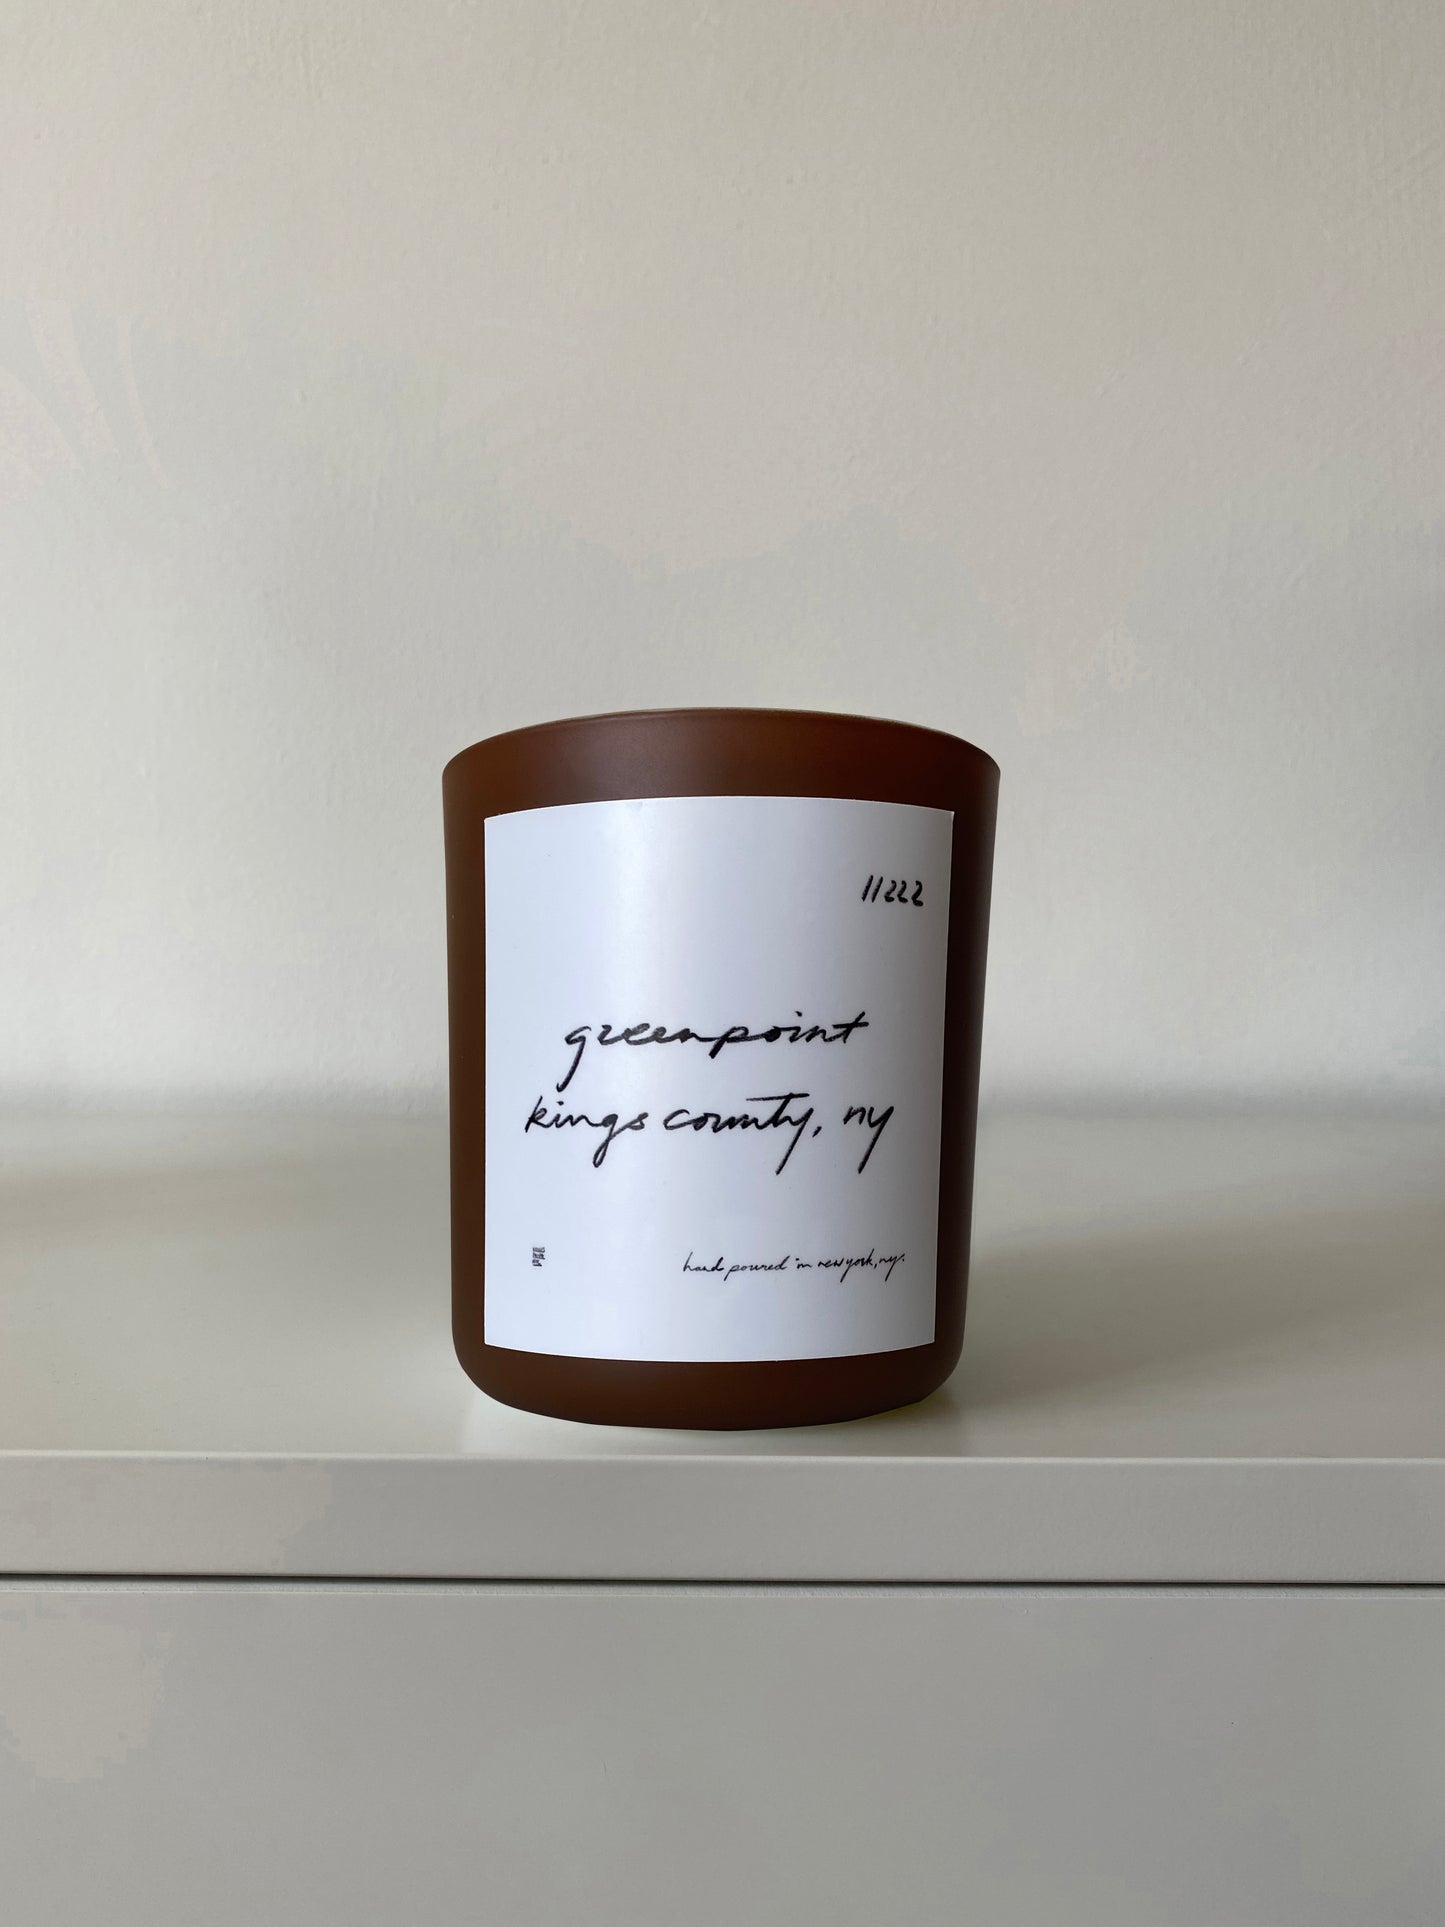 greenpoint candle (12oz)